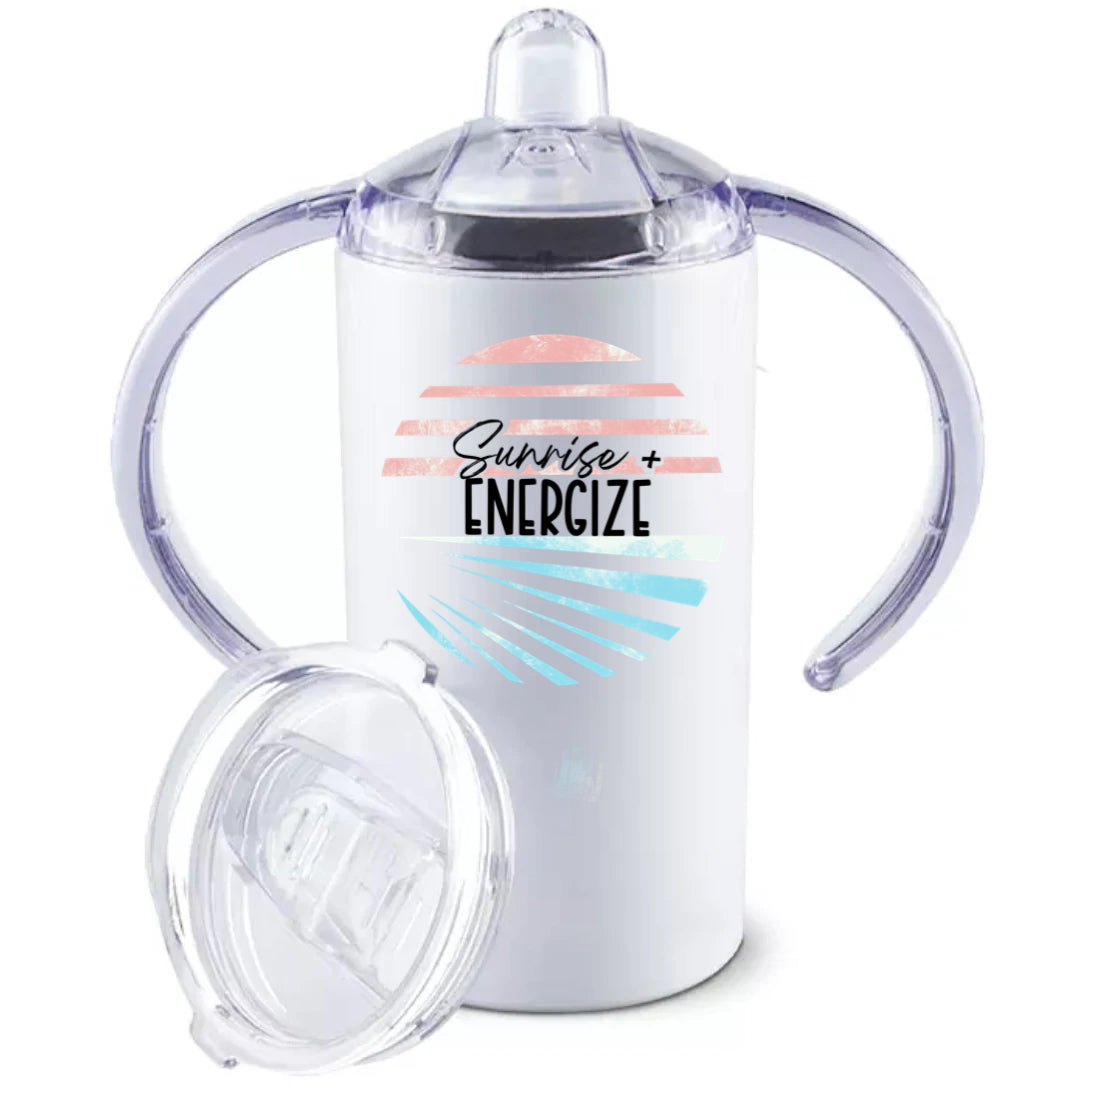 Mini ENERGIZE LIVE SIPPY CUPS